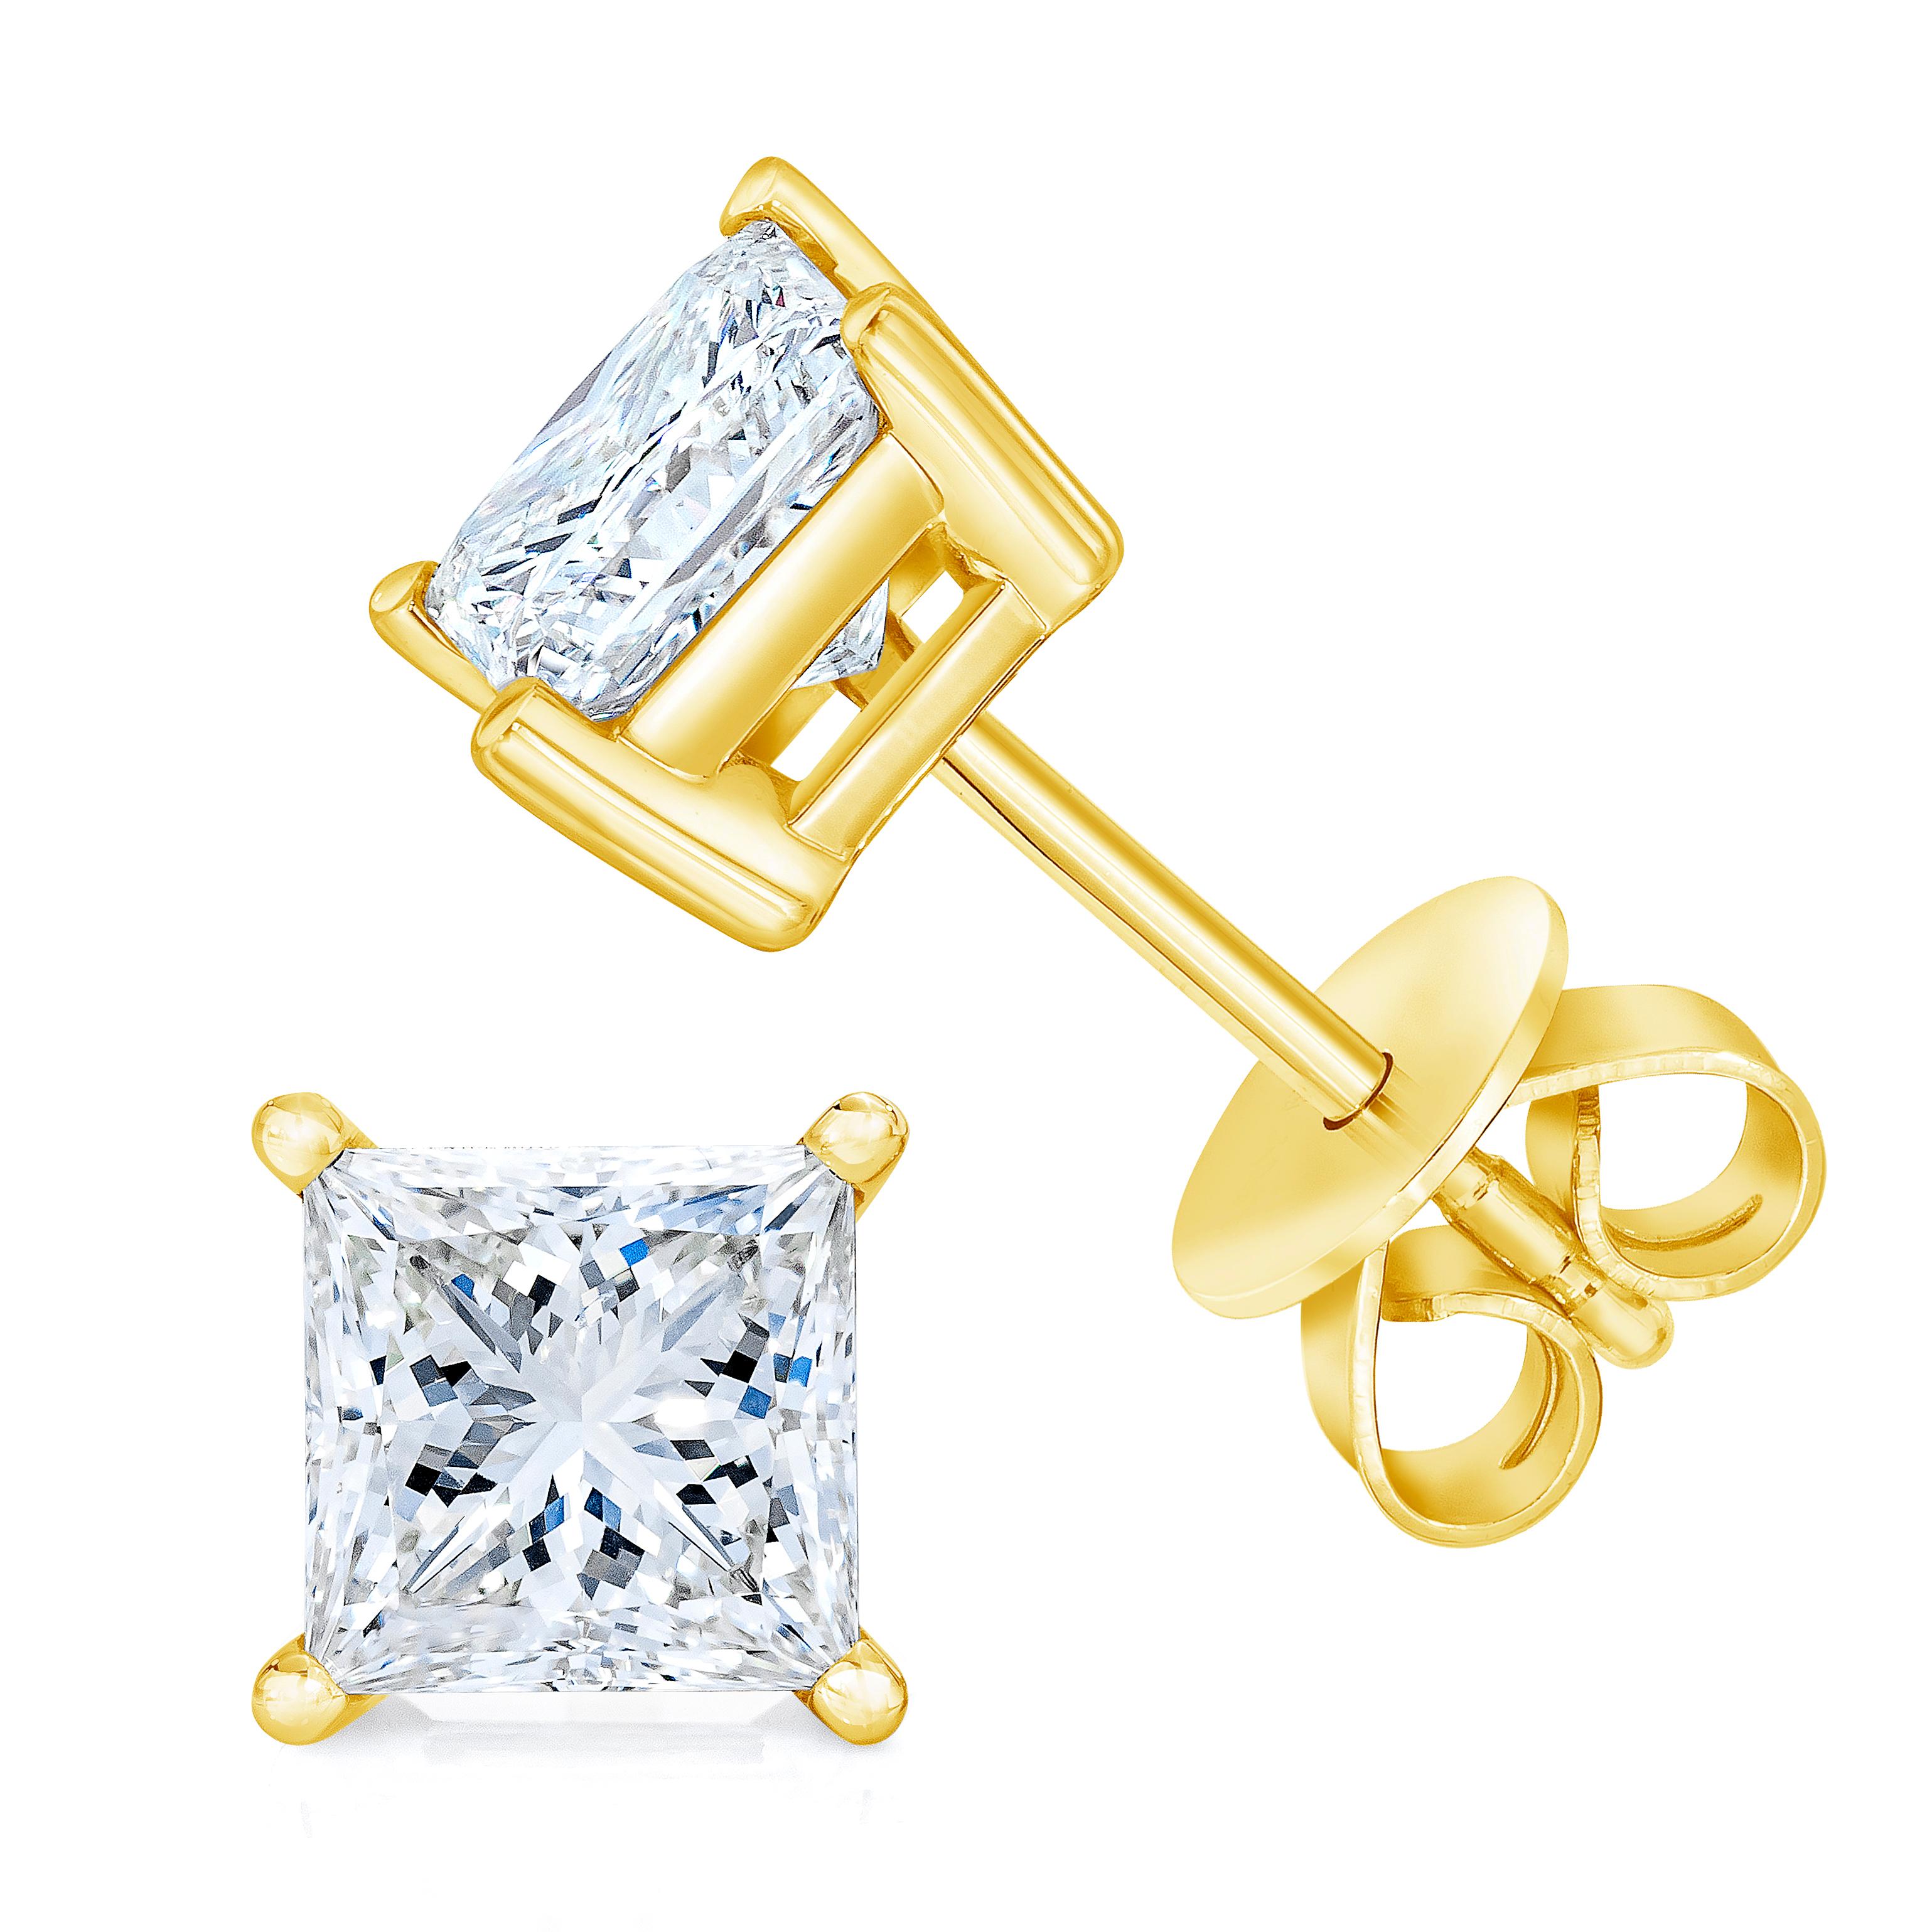 Frame her face with the bold and impressive look of these fabulous round cut diamond stud earrings. Crafted in 14K yellow gold, each earring features a mesmerizing 1 ct tdw diamond solitaire in a four-prong setting. Captivating with natural diamonds